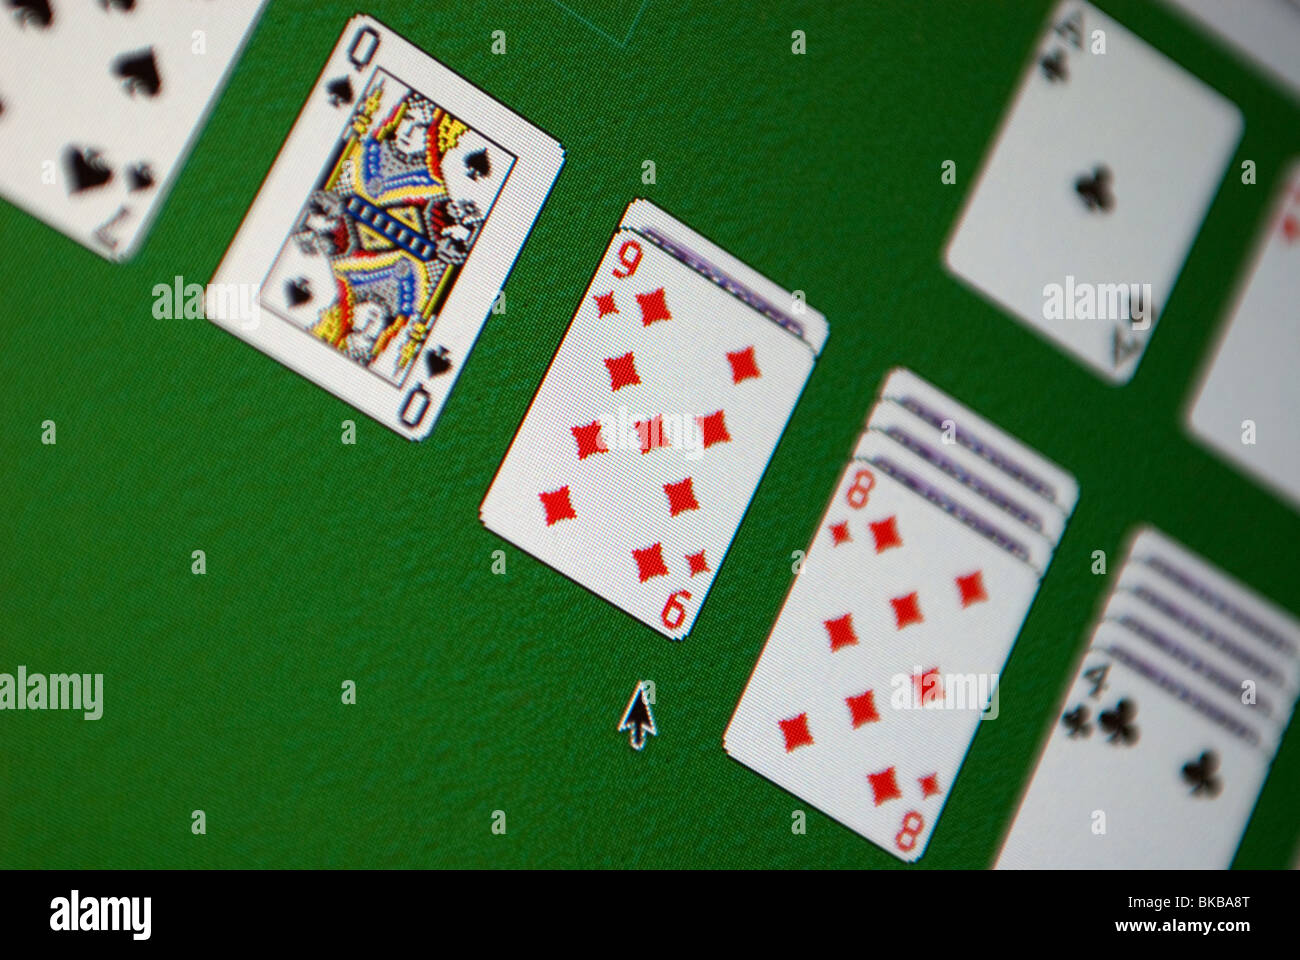 Solitaire games - Games online